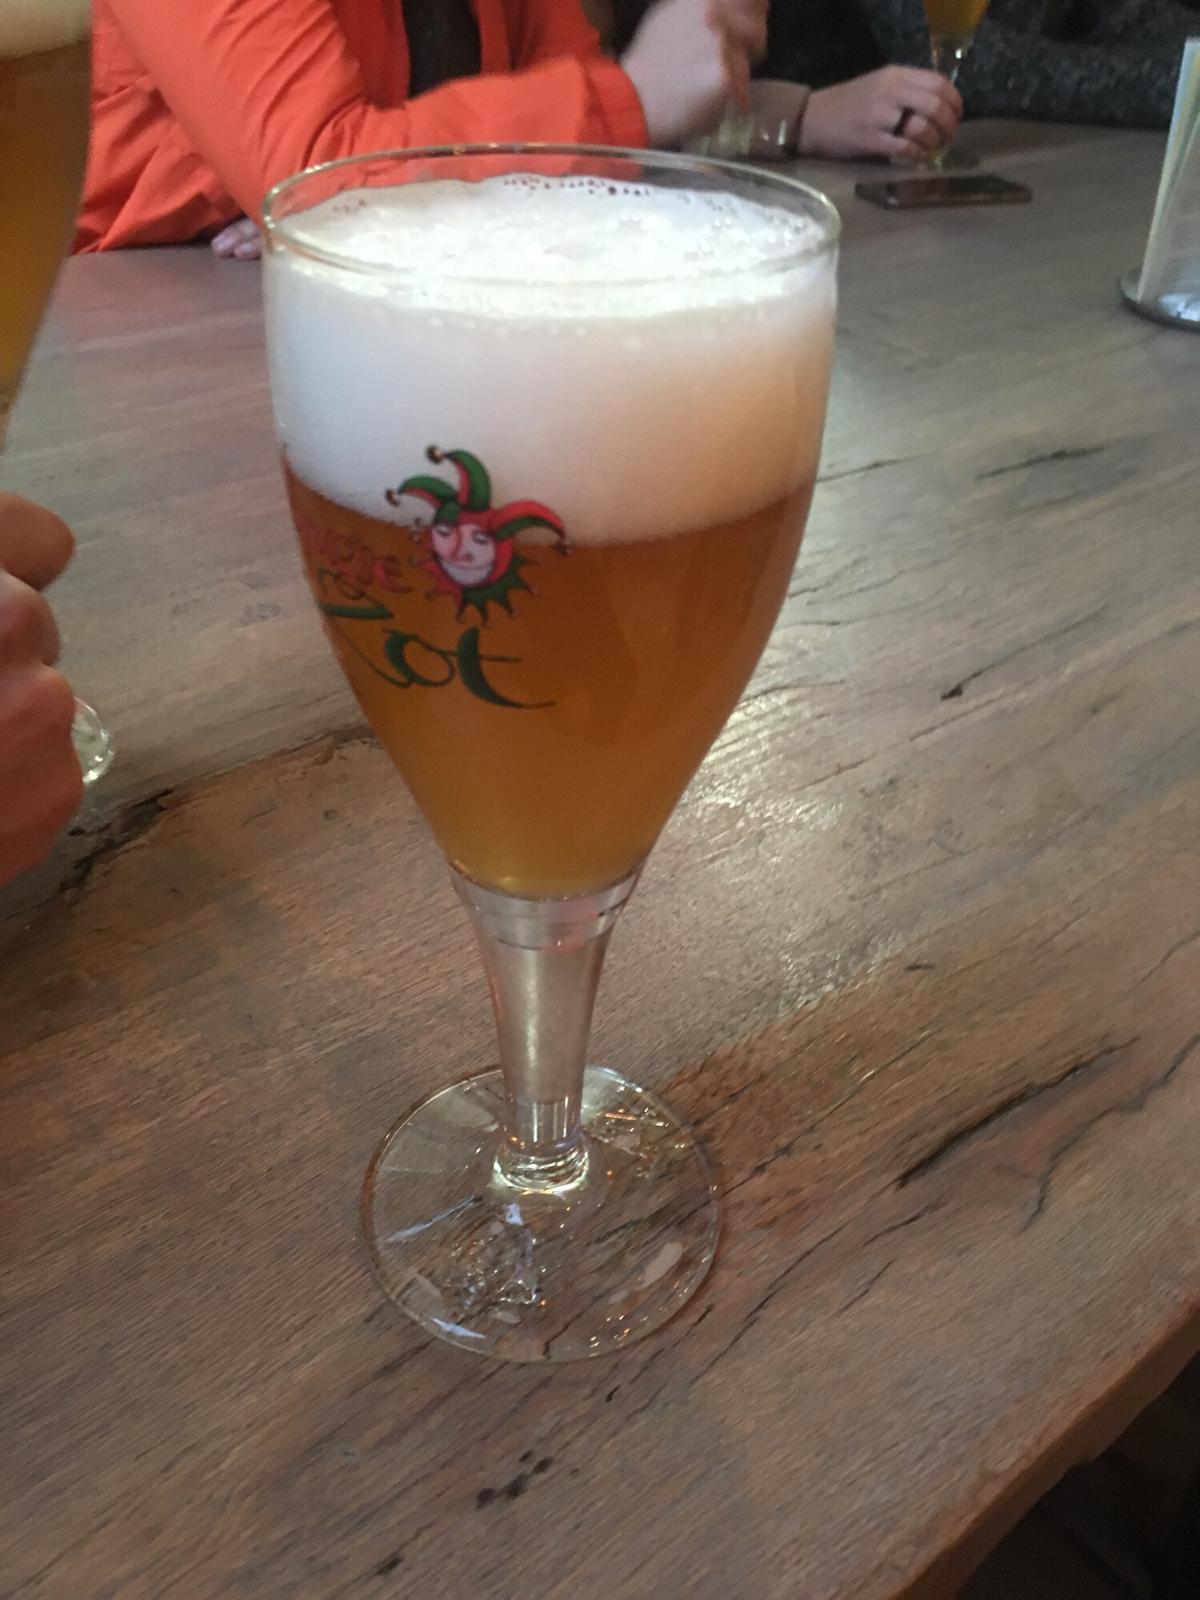 Bruges Zot Unfiltered (Only Available at the Brewery)